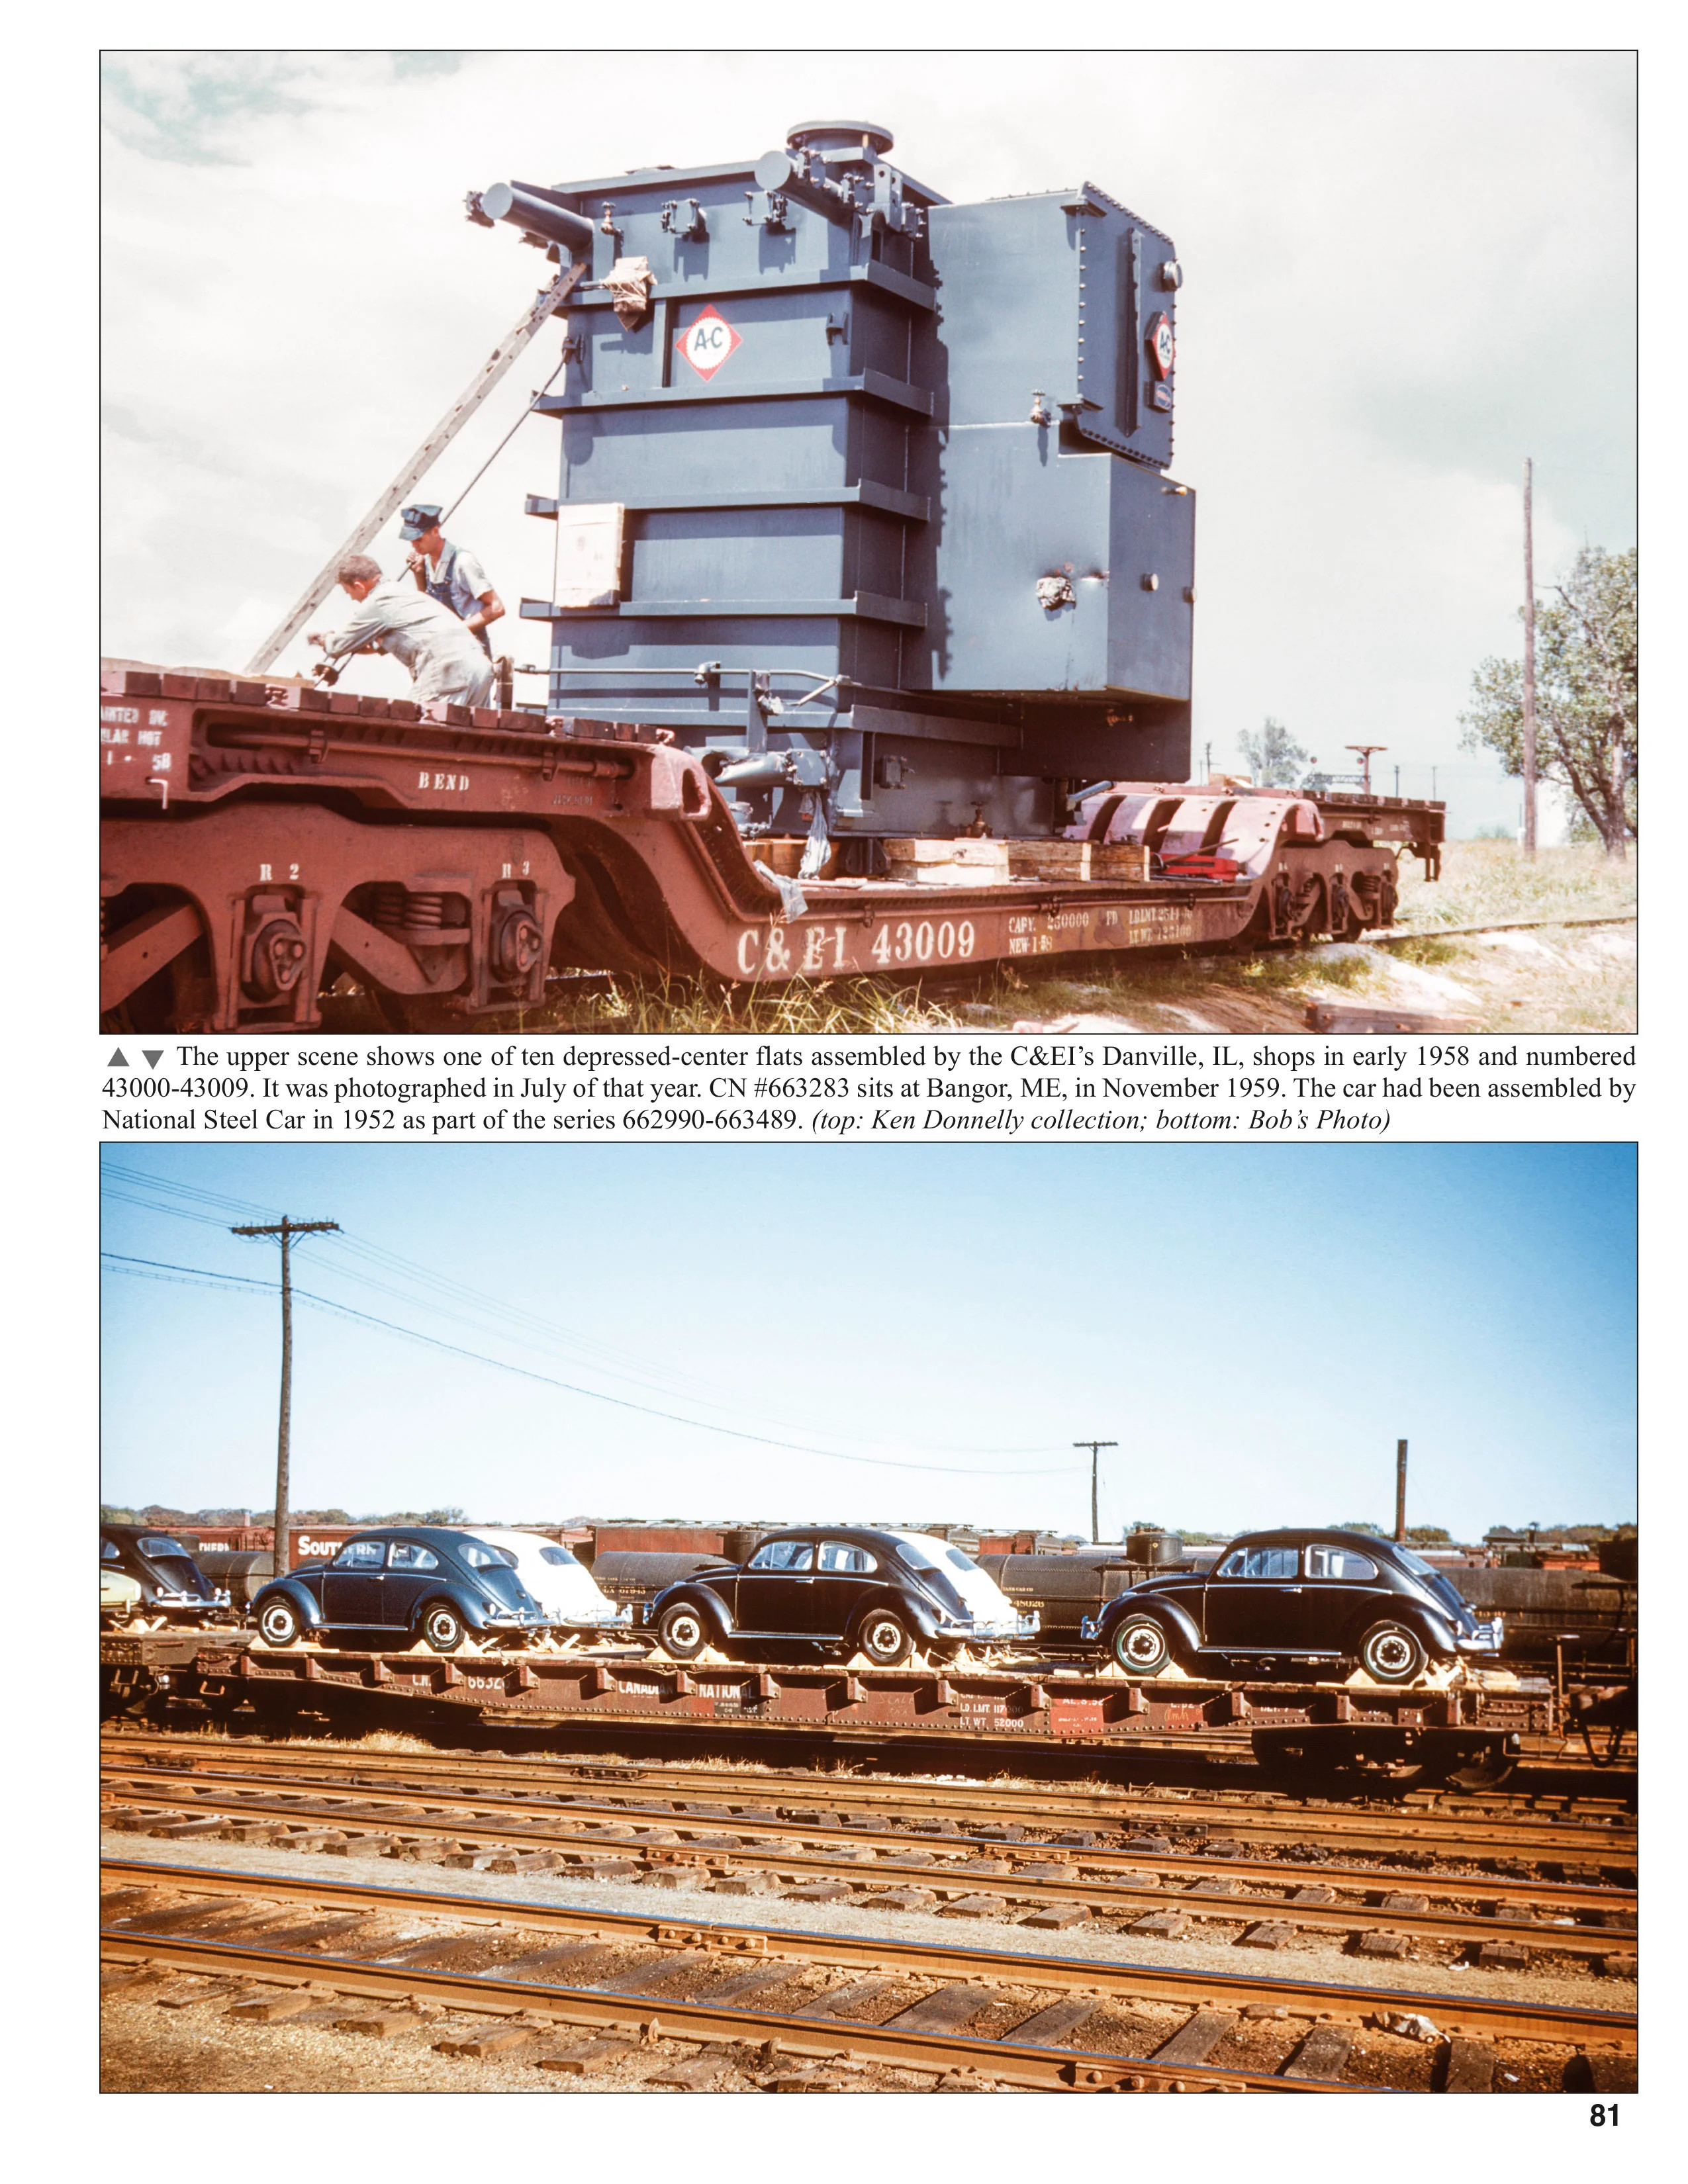 Morning Sun Books 1771 1950s Freight Car Color Guide Volume 2: Boxcars, Covered & Open Hoppers, Flatcars, & Gondolas